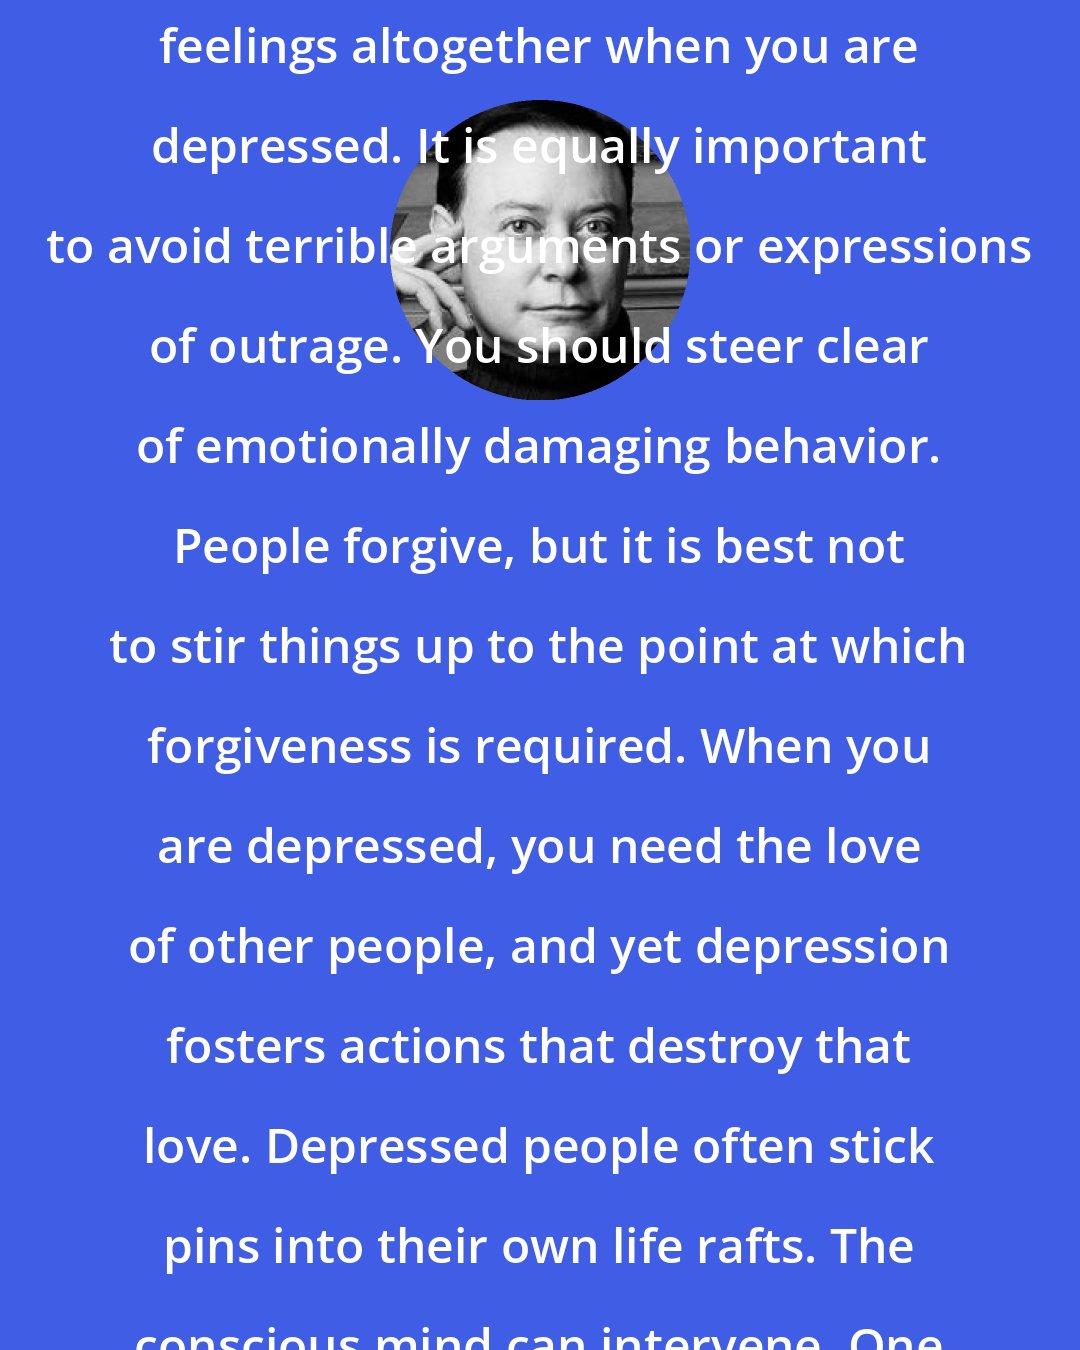 Andrew Solomon: It is important not to suppress your feelings altogether when you are depressed. It is equally important to avoid terrible arguments or expressions of outrage. You should steer clear of emotionally damaging behavior. People forgive, but it is best not to stir things up to the point at which forgiveness is required. When you are depressed, you need the love of other people, and yet depression fosters actions that destroy that love. Depressed people often stick pins into their own life rafts. The conscious mind can intervene. One is not helpless.